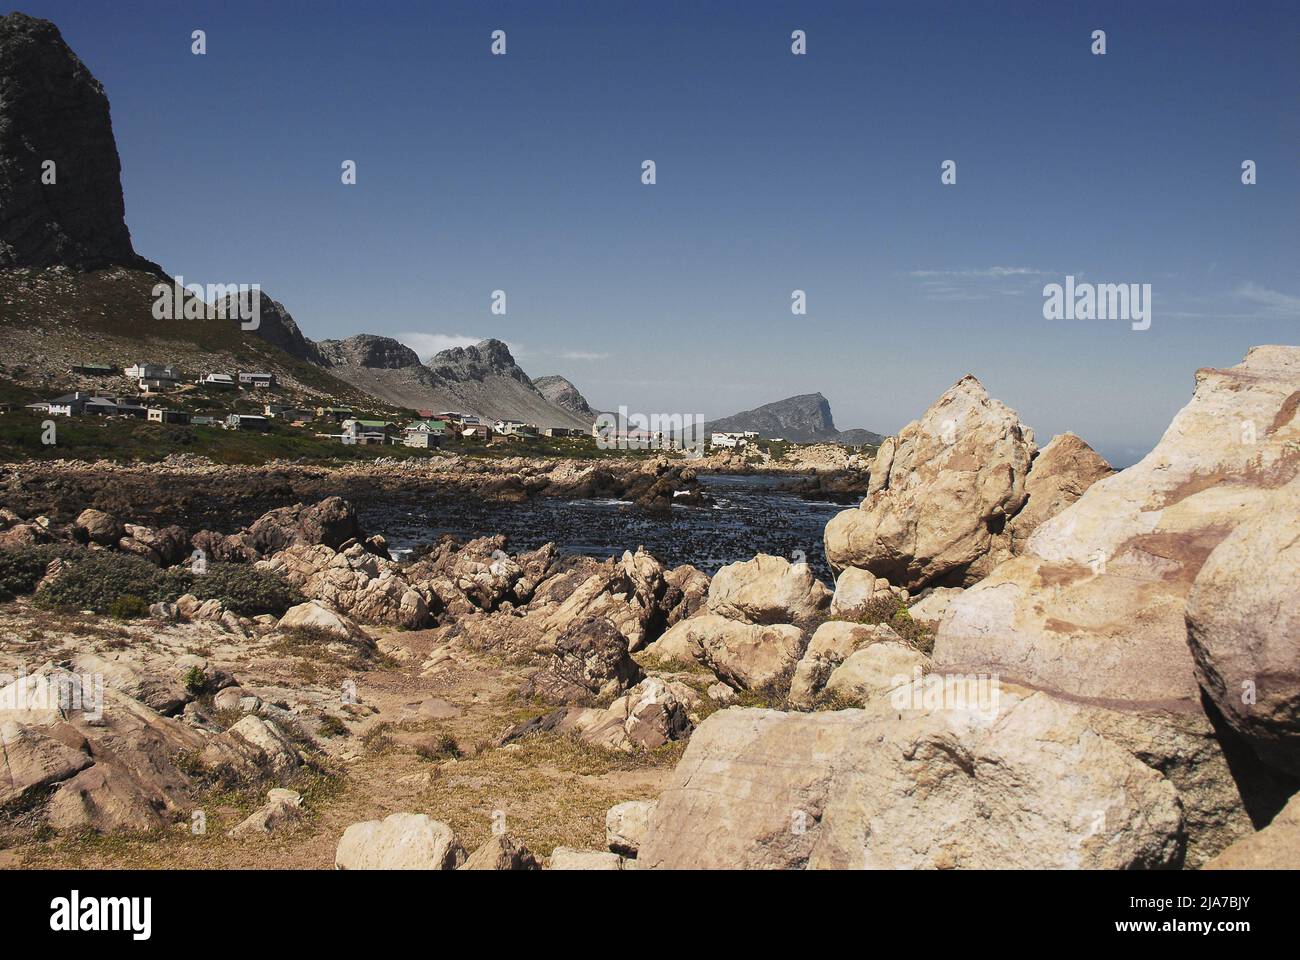 Panoramic view of the homes in the settlement of Rooi-Els perched between high mountain cliffs and the rocky, rugged coastline of South Africa. Stock Photo